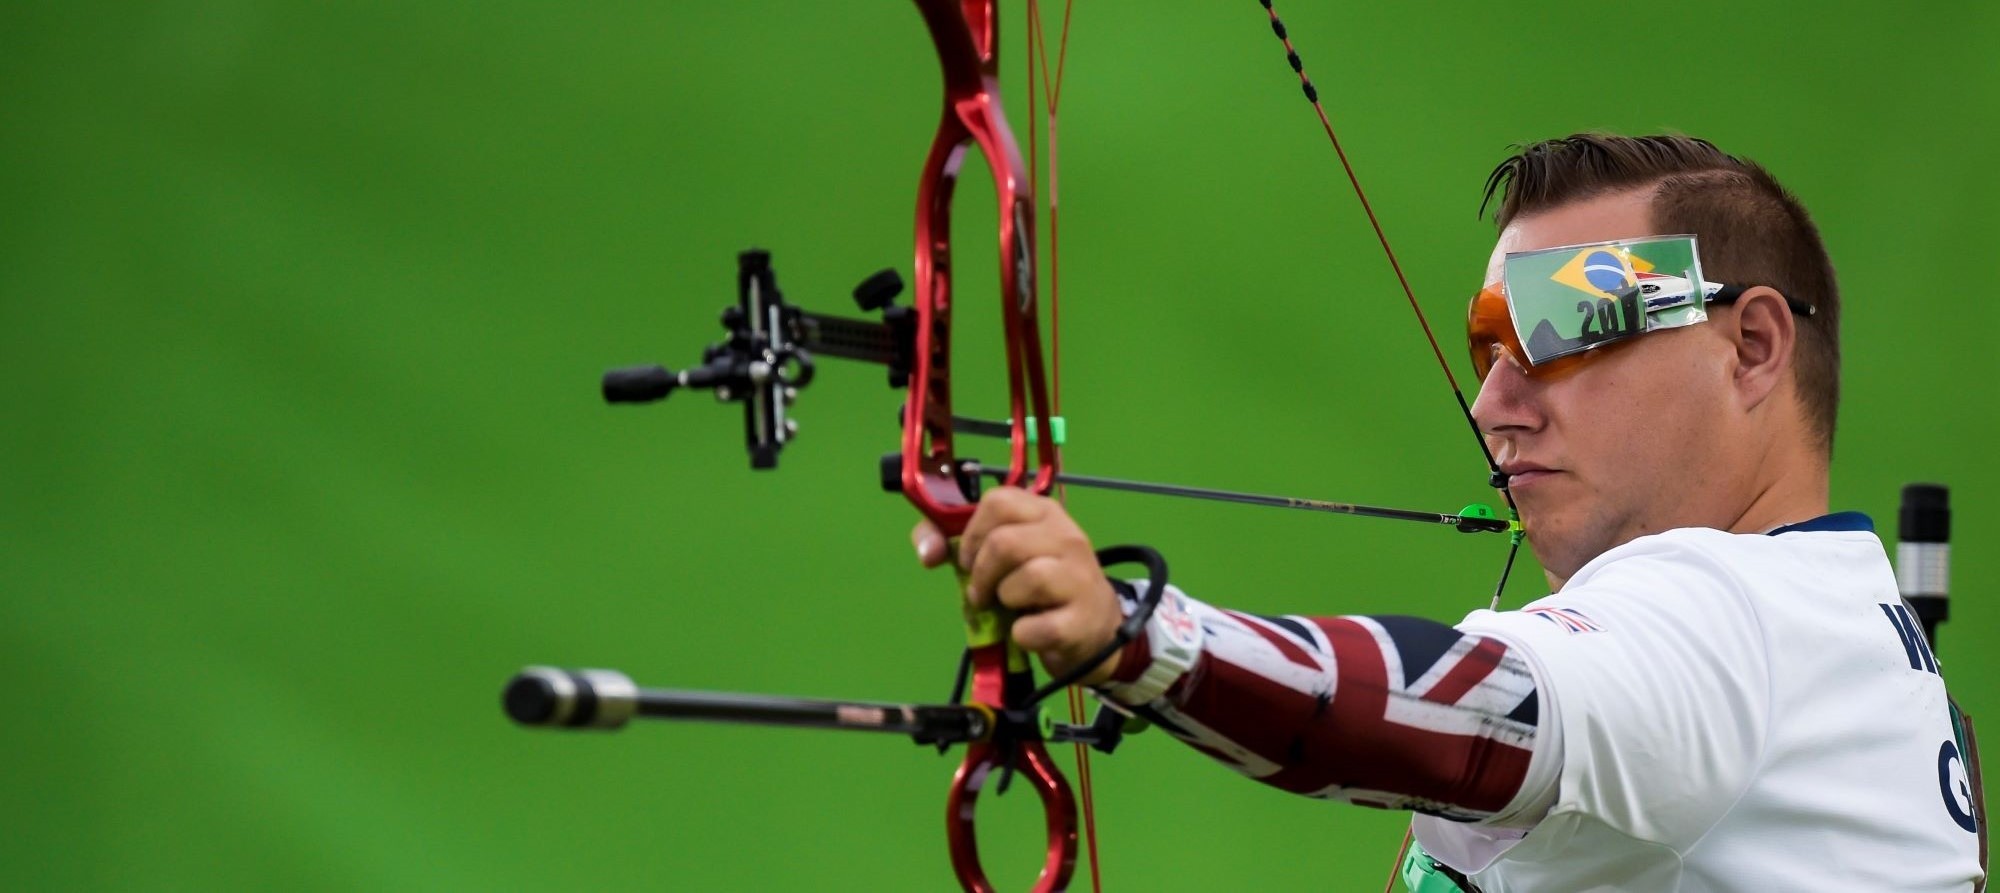 How do archers qualify for the Paris 2024 Olympic Games?